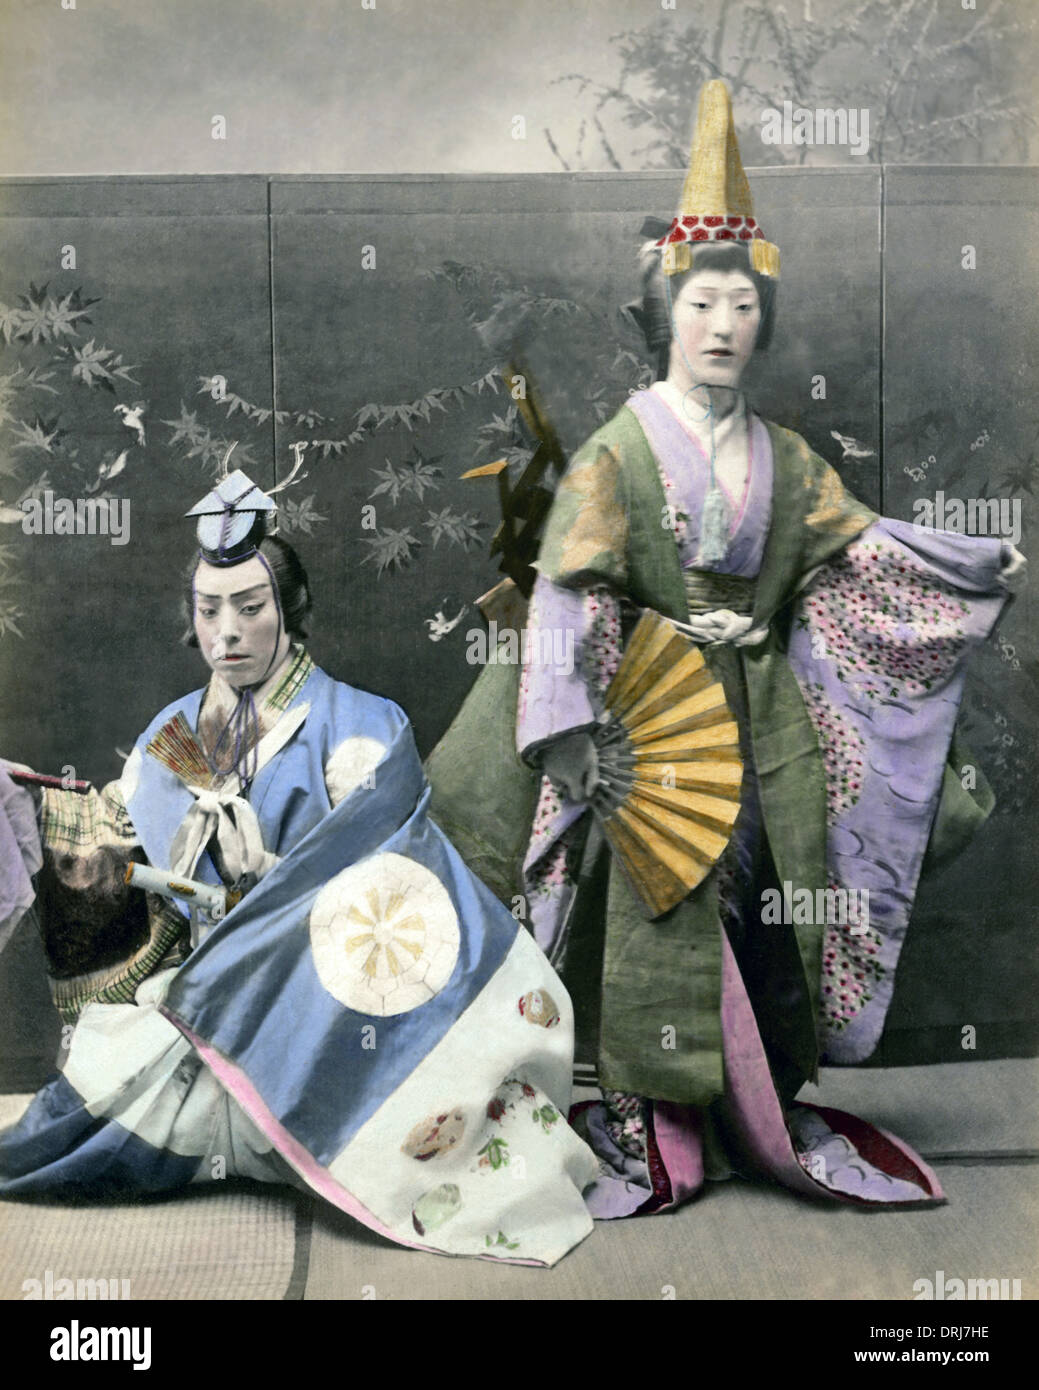 Theatrical performers, Japan Stock Photo